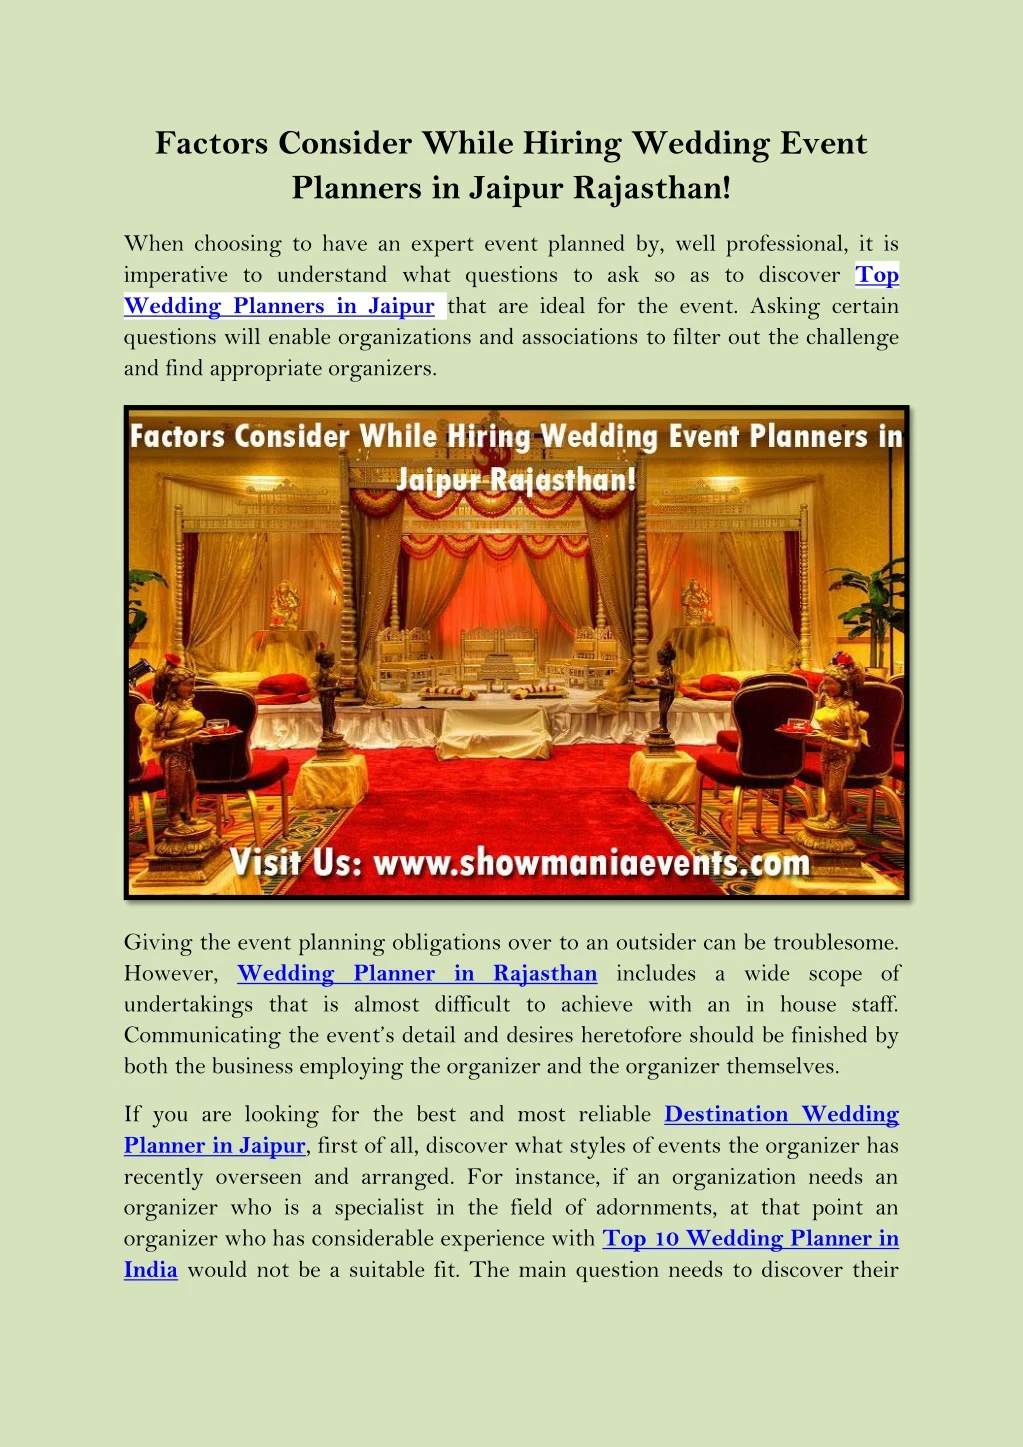 factors consider while hiring wedding event